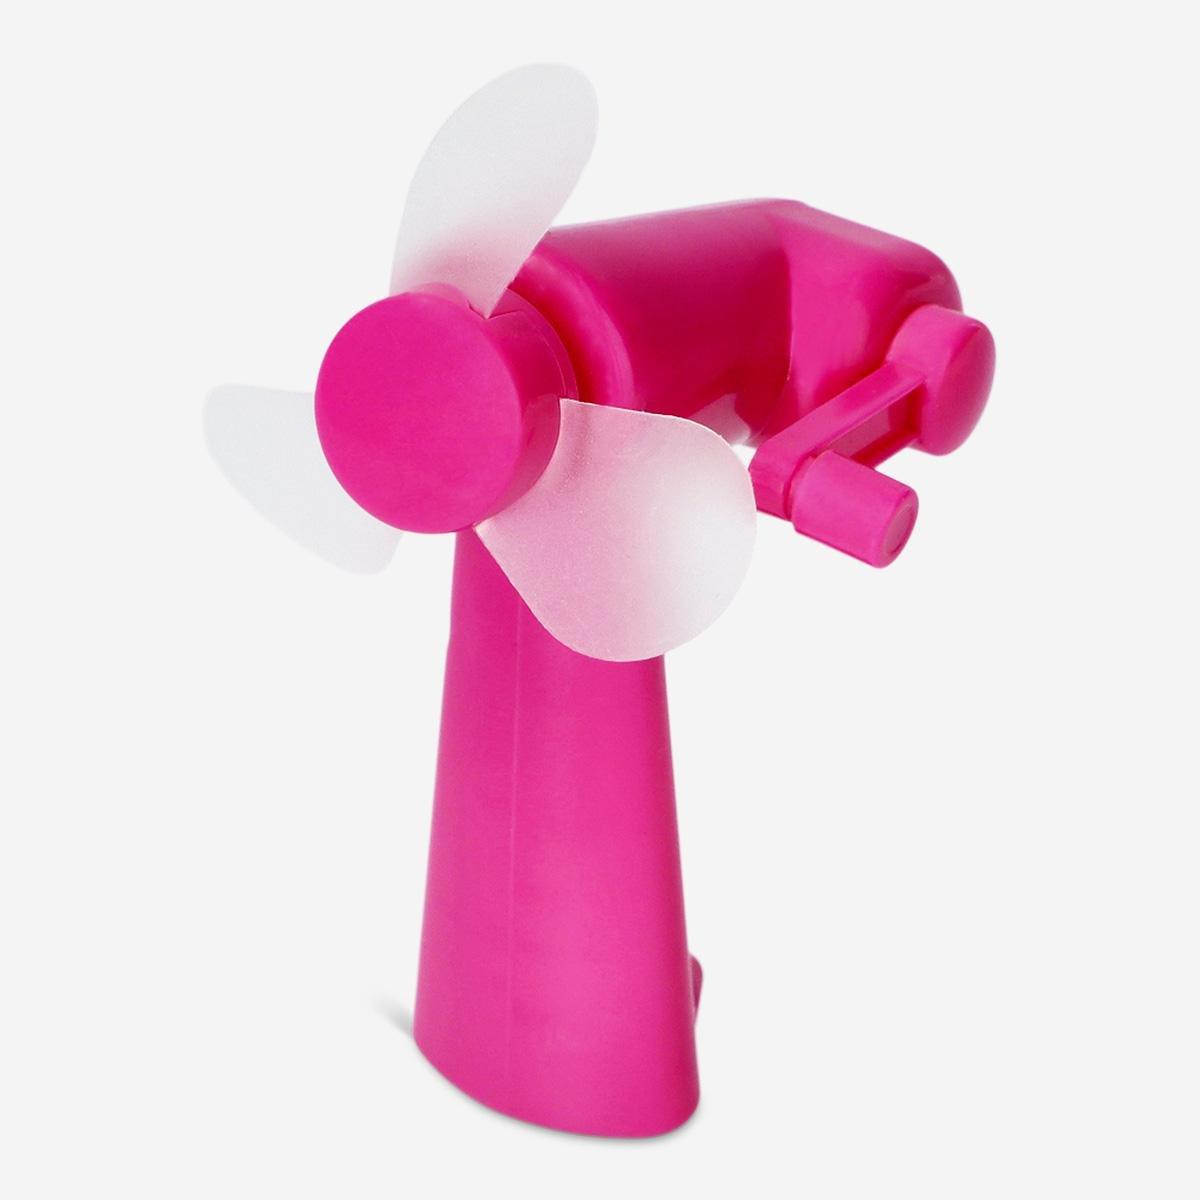 Pink fan with crank handle